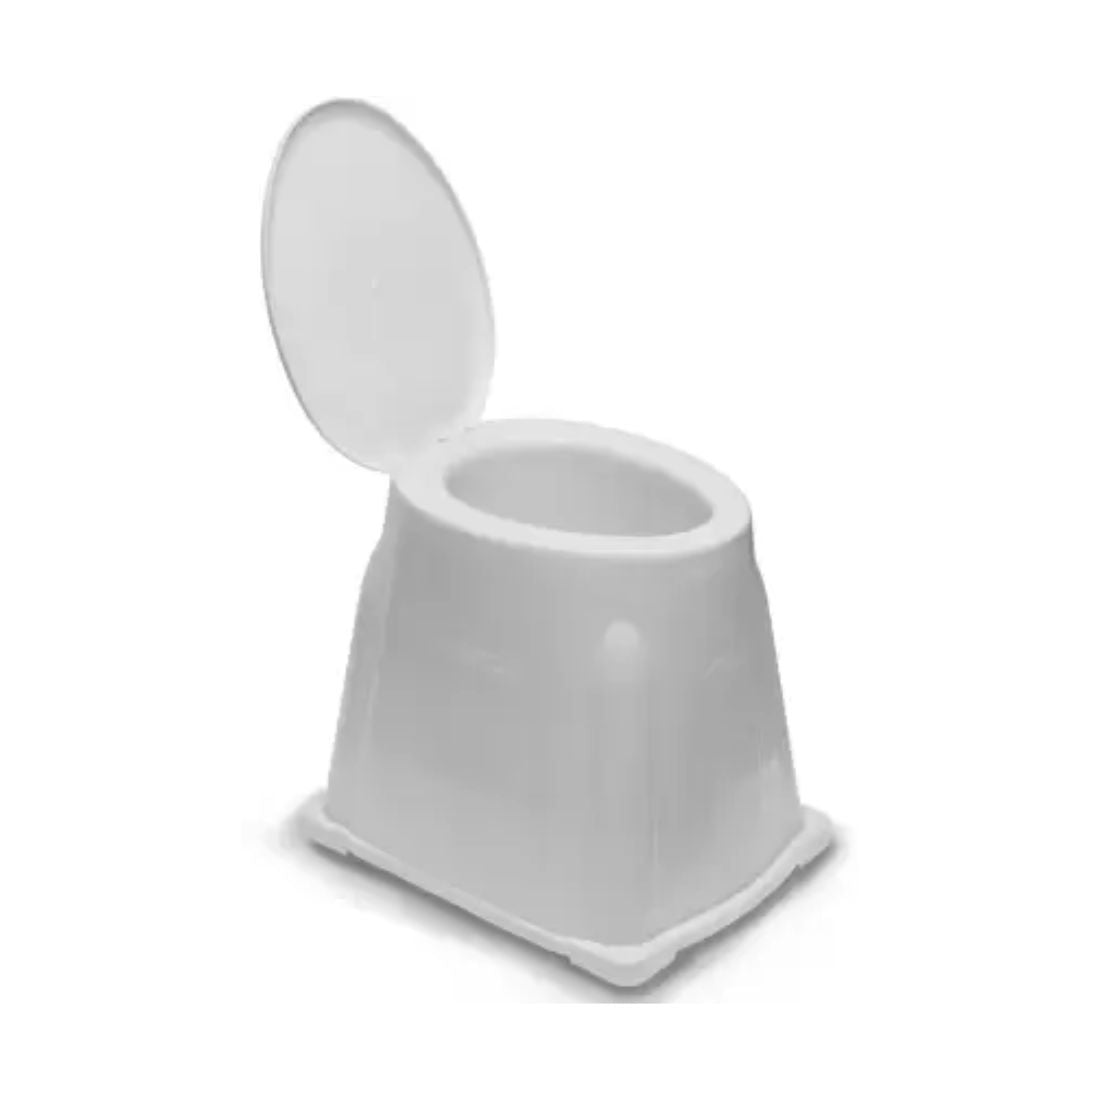 Portable Indian to Western Commode Converter - Commode Stool for Indian Toilet